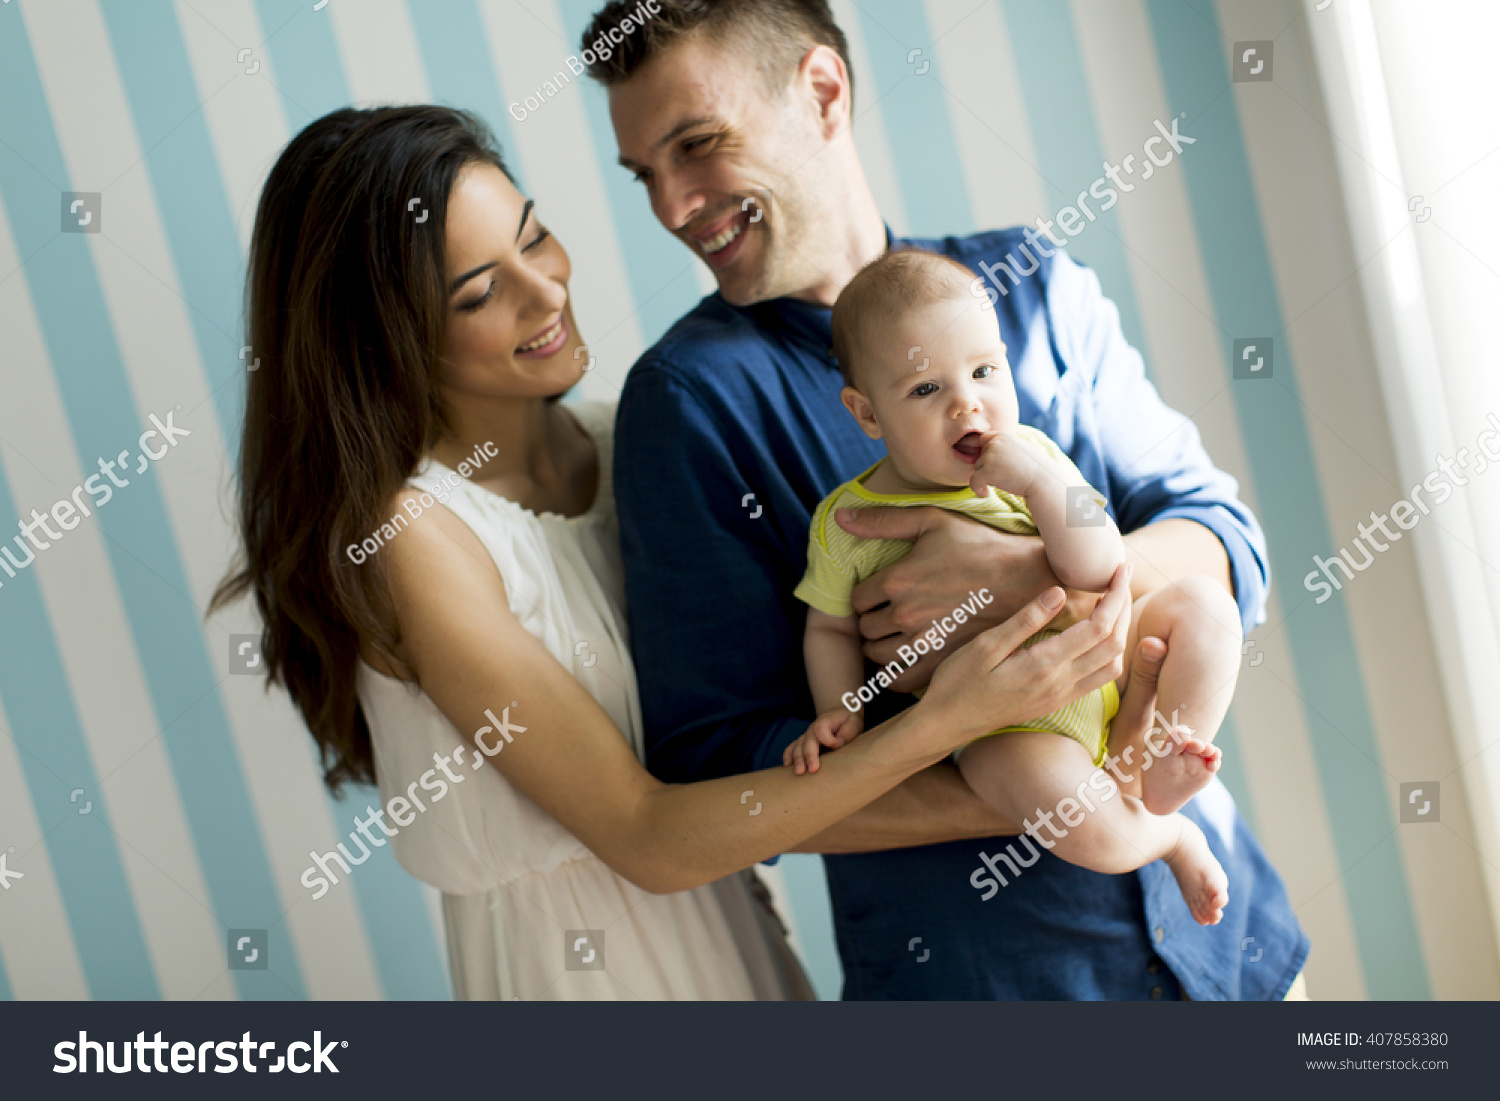 Young family with a baby standing by the wall #407858380